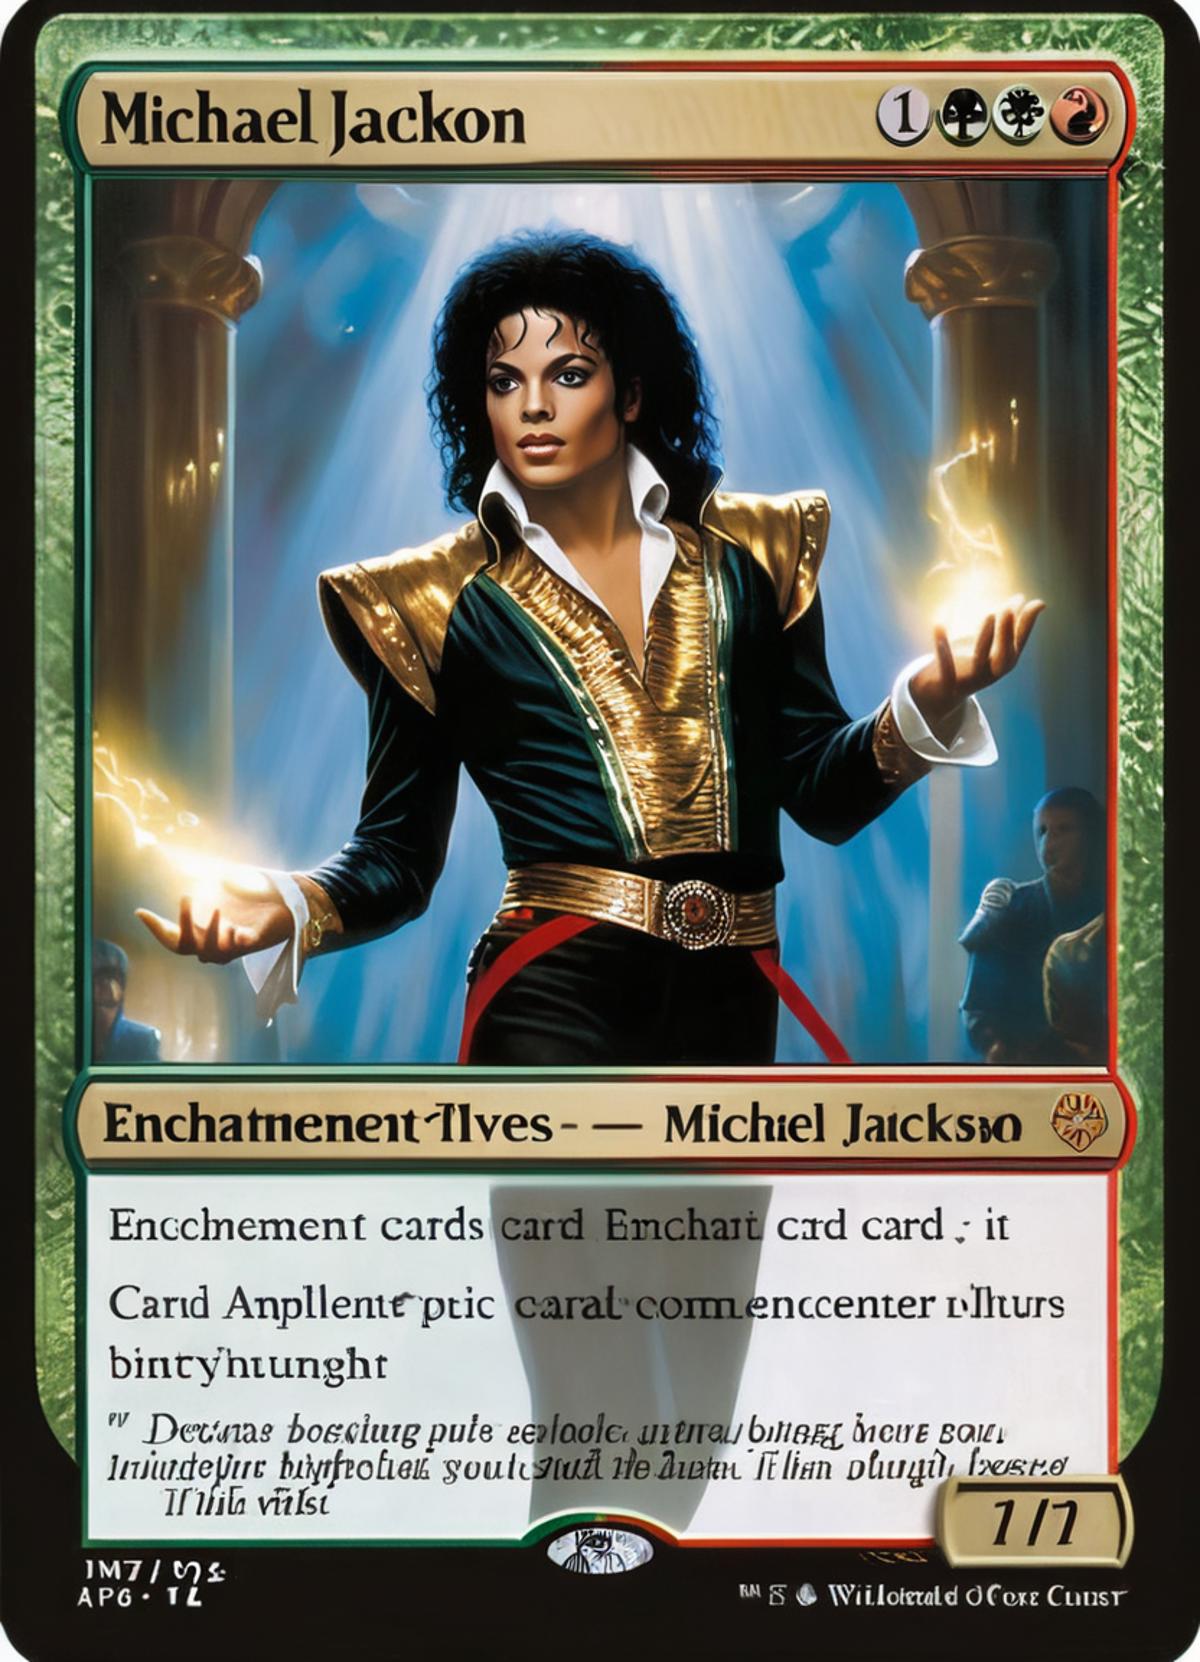 A Michael Jackson card from the Enchantment Lives set.